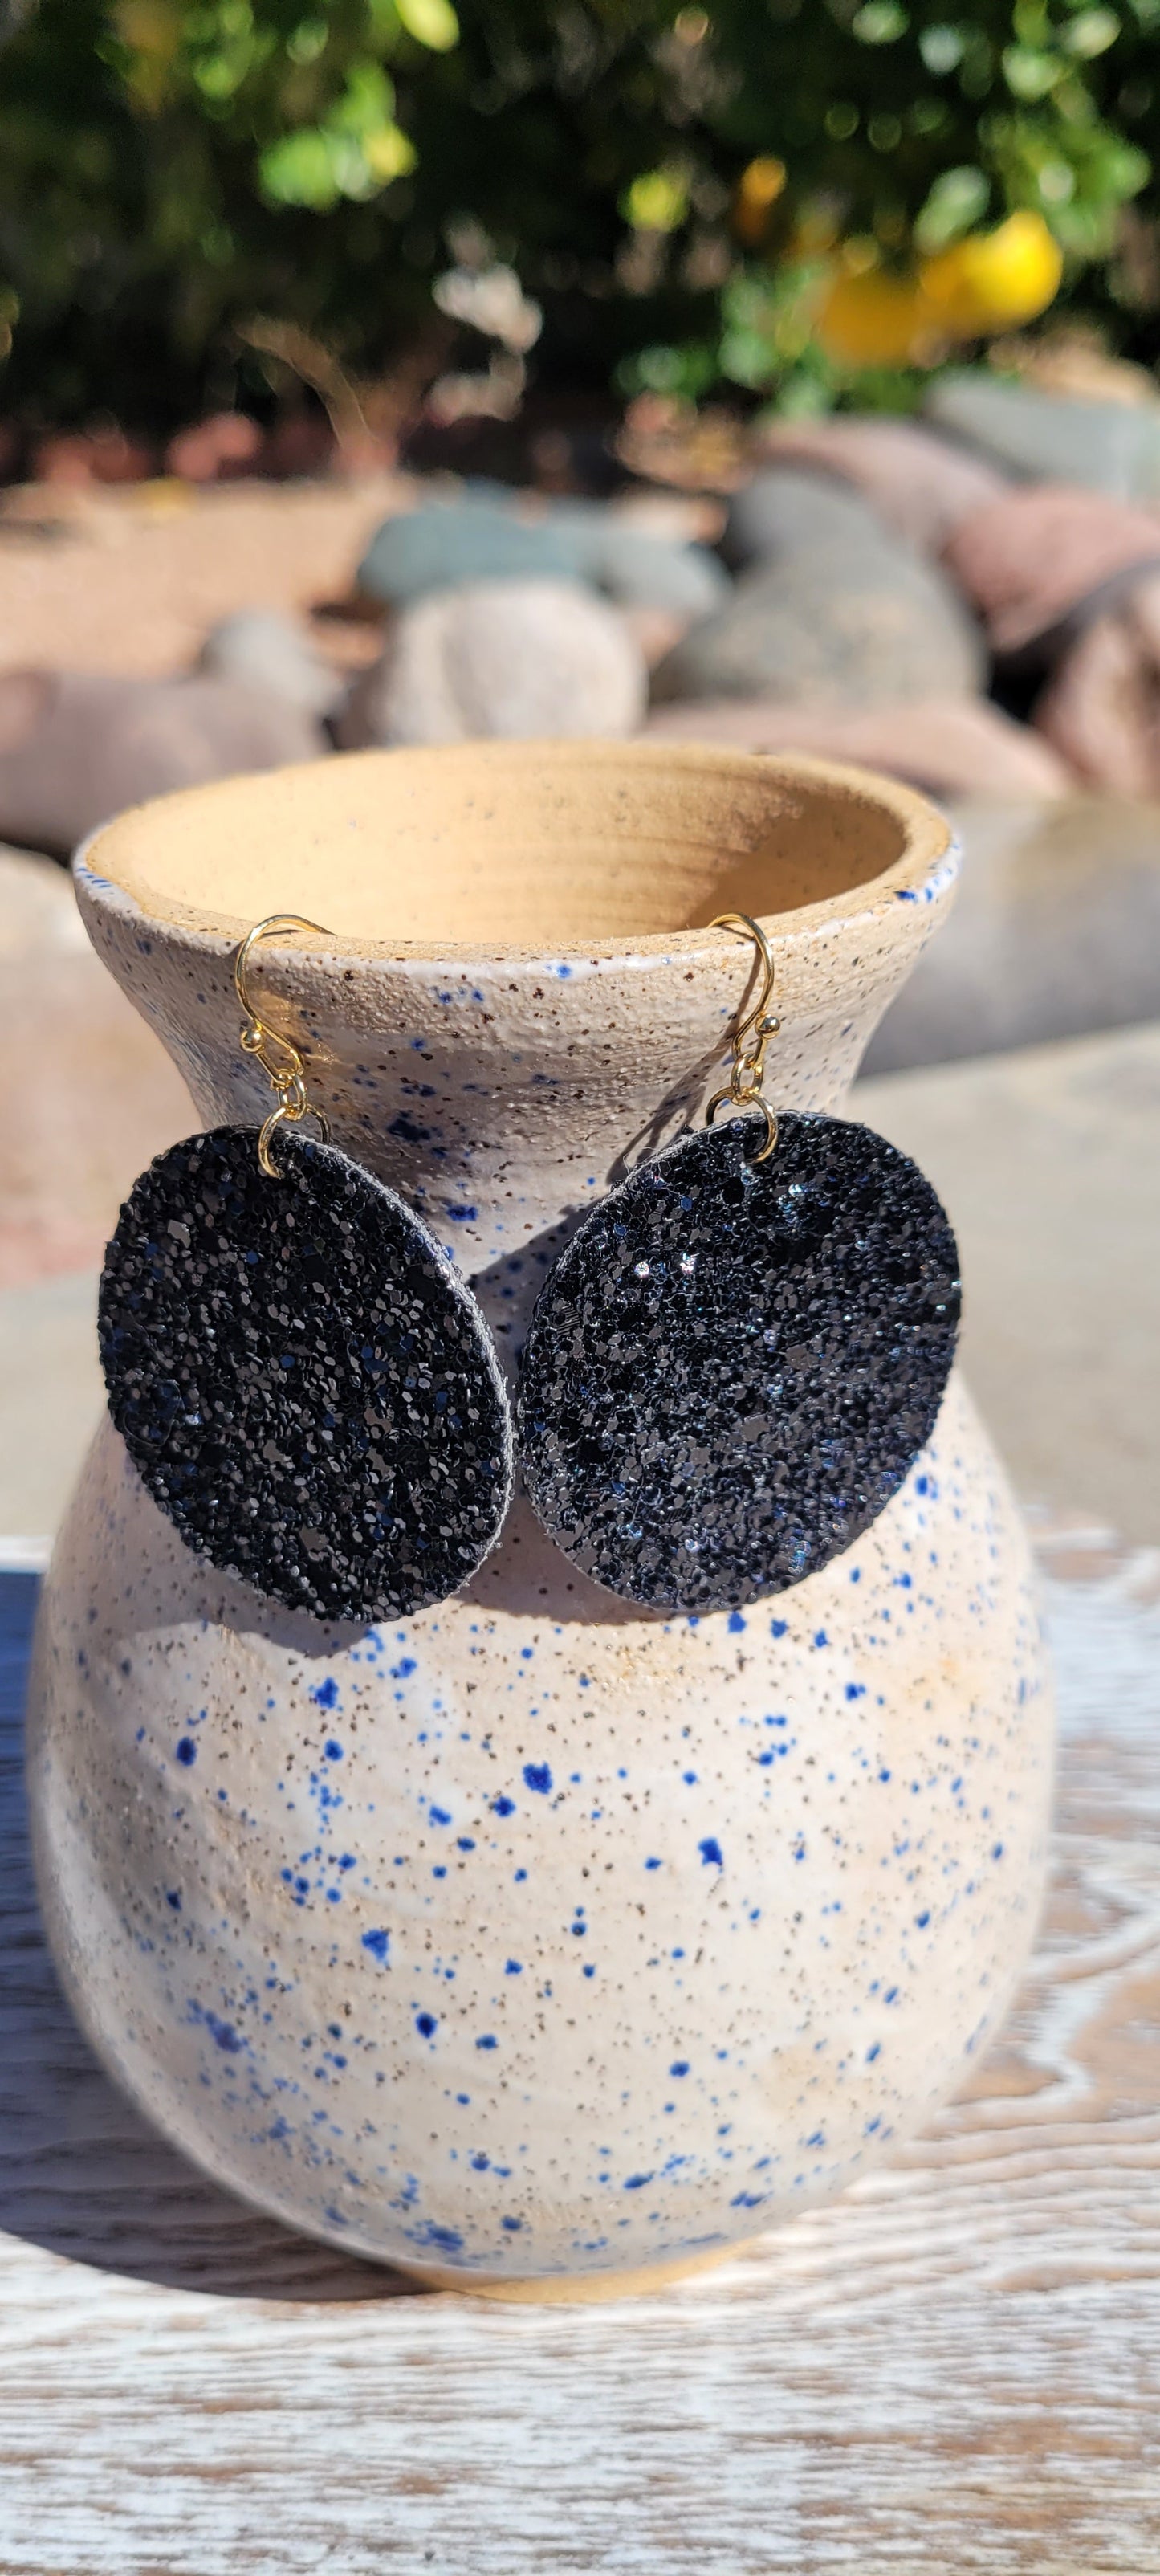 Circle shape Black glitter and sequins Brushed gold fish hook dangle earrings Rubber earring back Diameter 1.5” Whether you want to be on the wild side or classy this earring set it will add a fun touch to your outfit